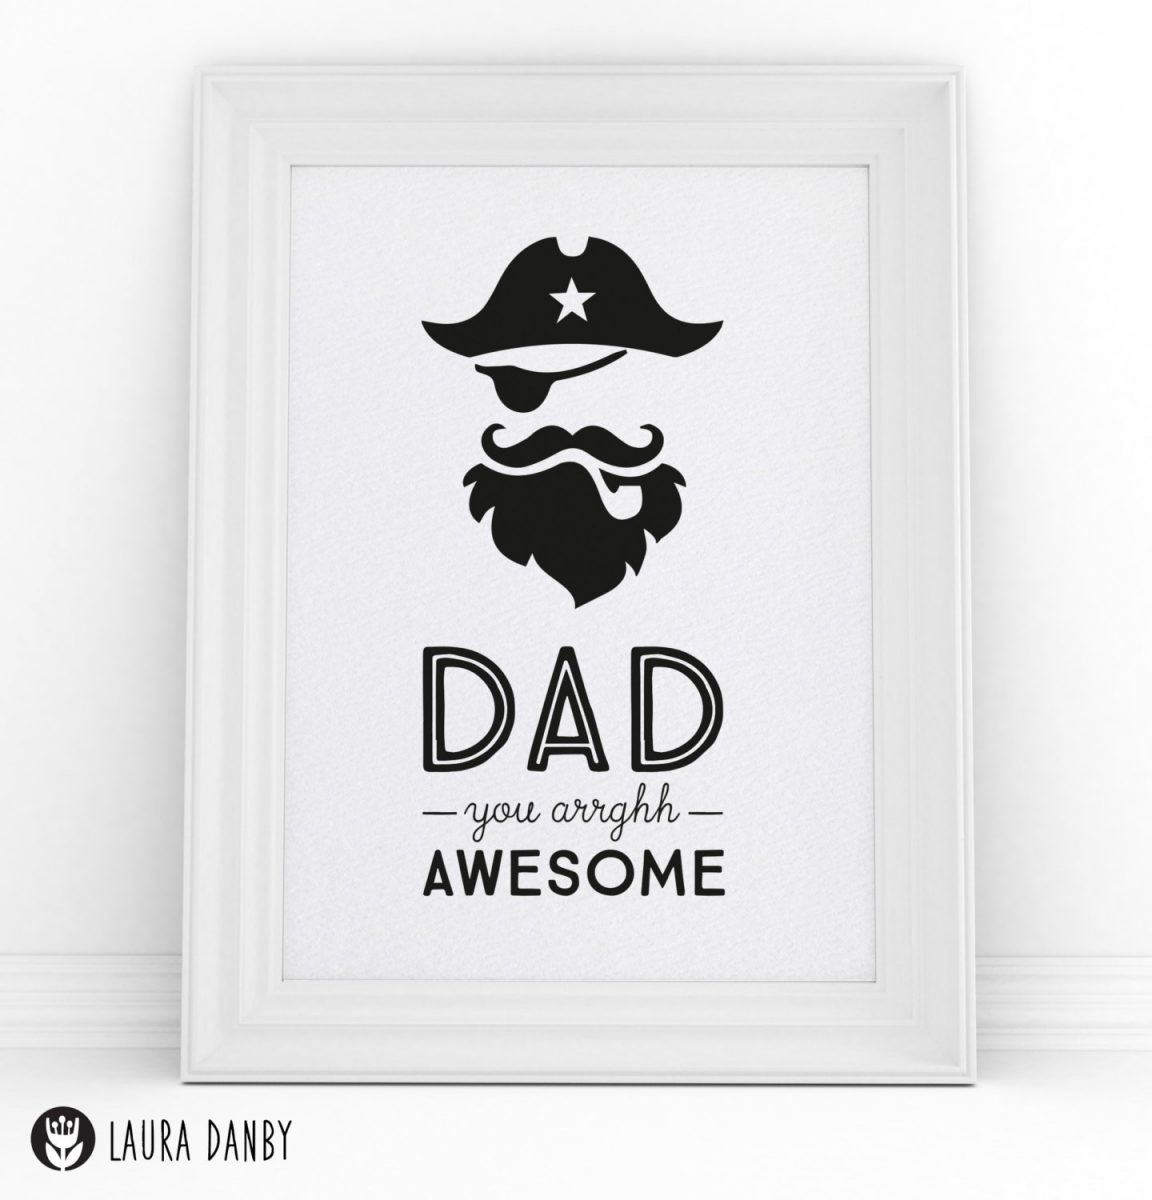 Pirate Print For Dad, Fathers Day Gift, Gift From Son, New Dad Gift, Retro Pirate Art Poster, Gifts for Dad, Dad Print, Retro Birthday Gift